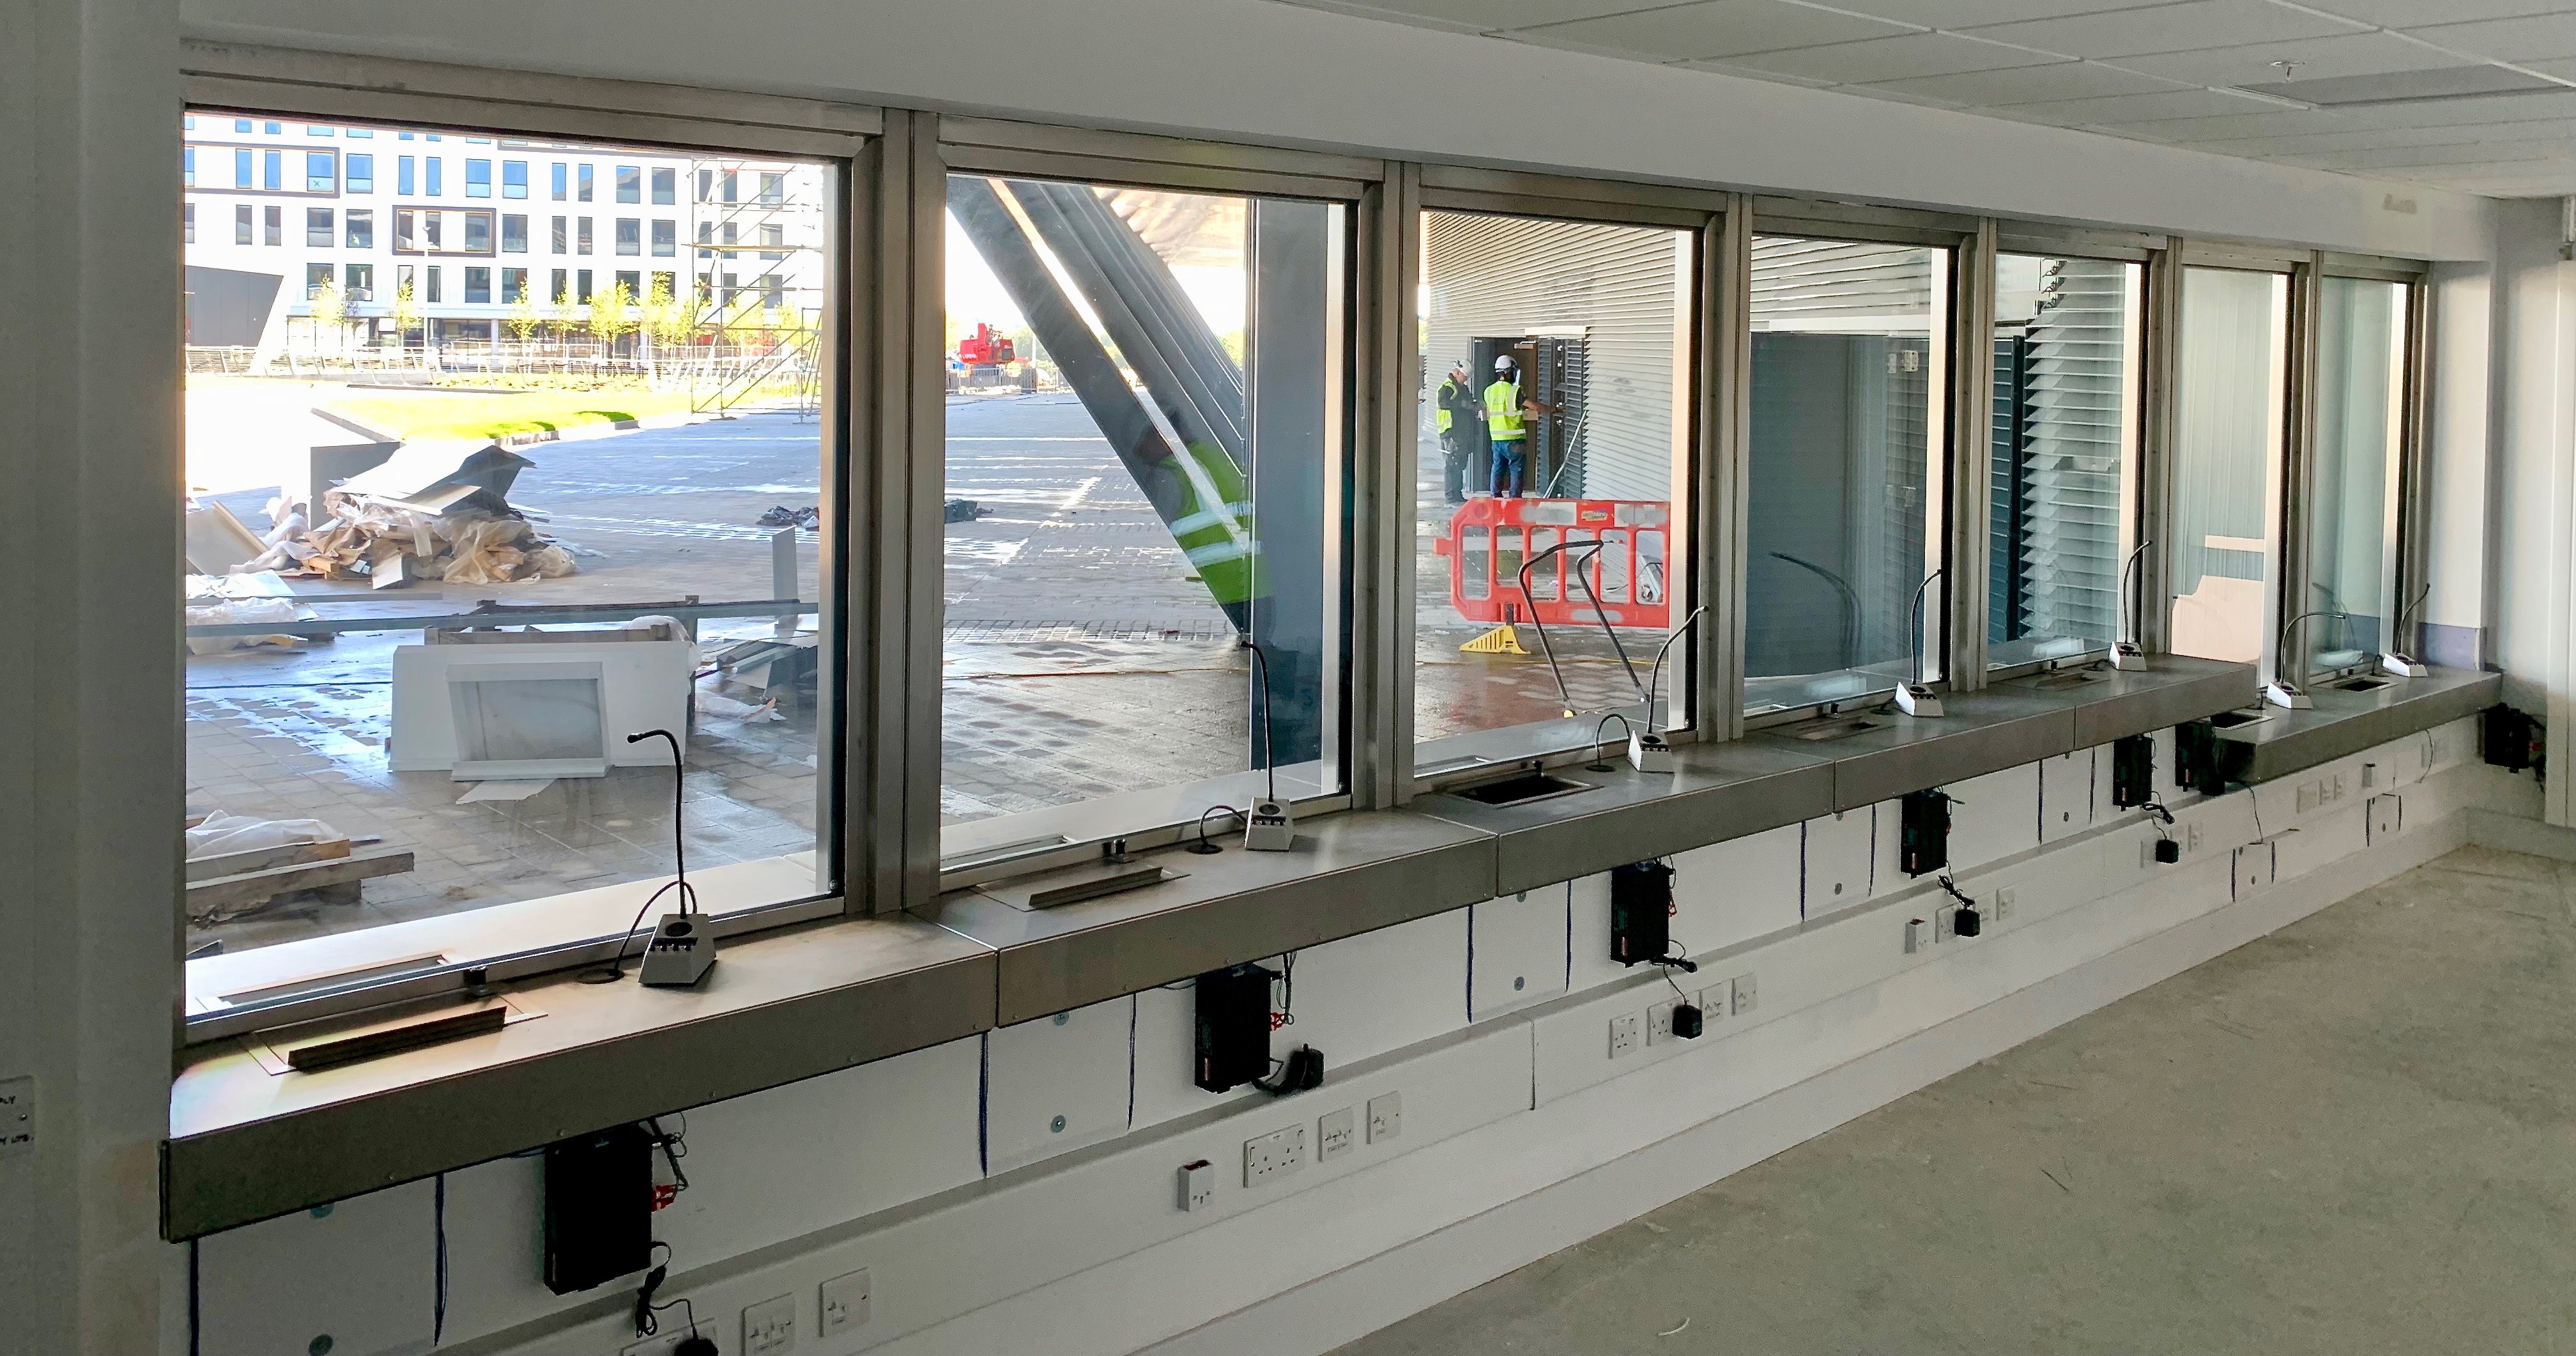 Conference Centre   Ticcket Office Glazed Screens